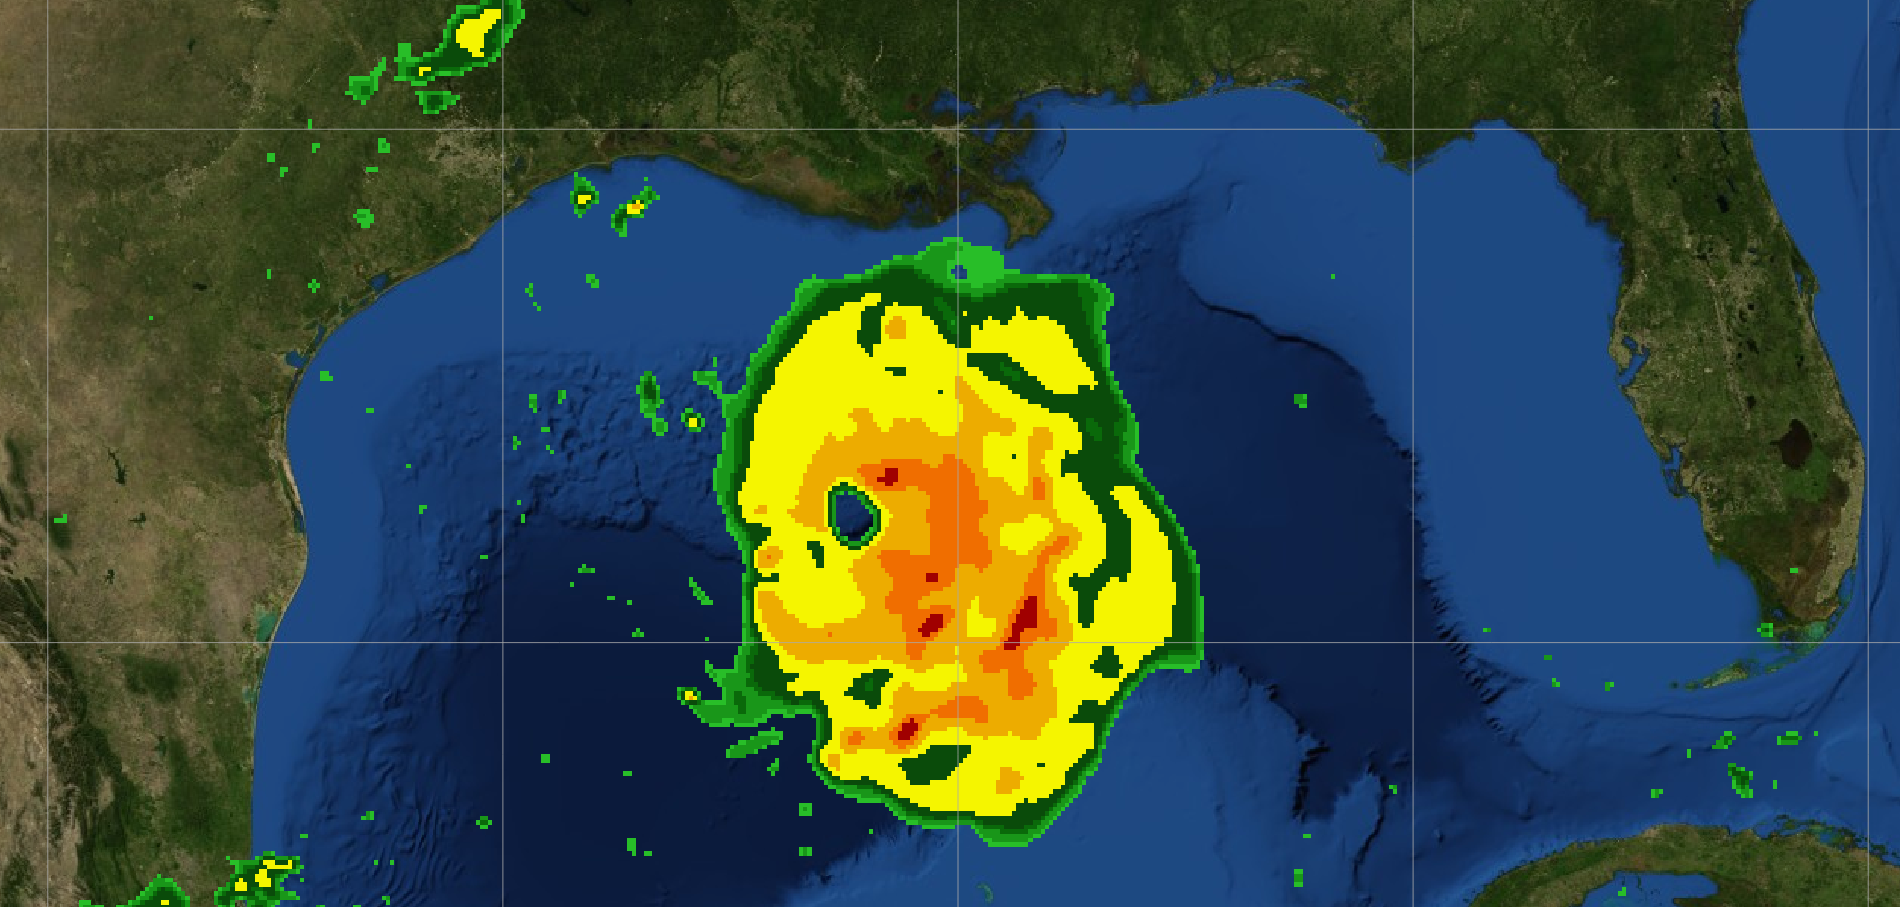 A radar-like image showing a hurricane, a circle colored yellow and red, in the blue gulf of mexico. 